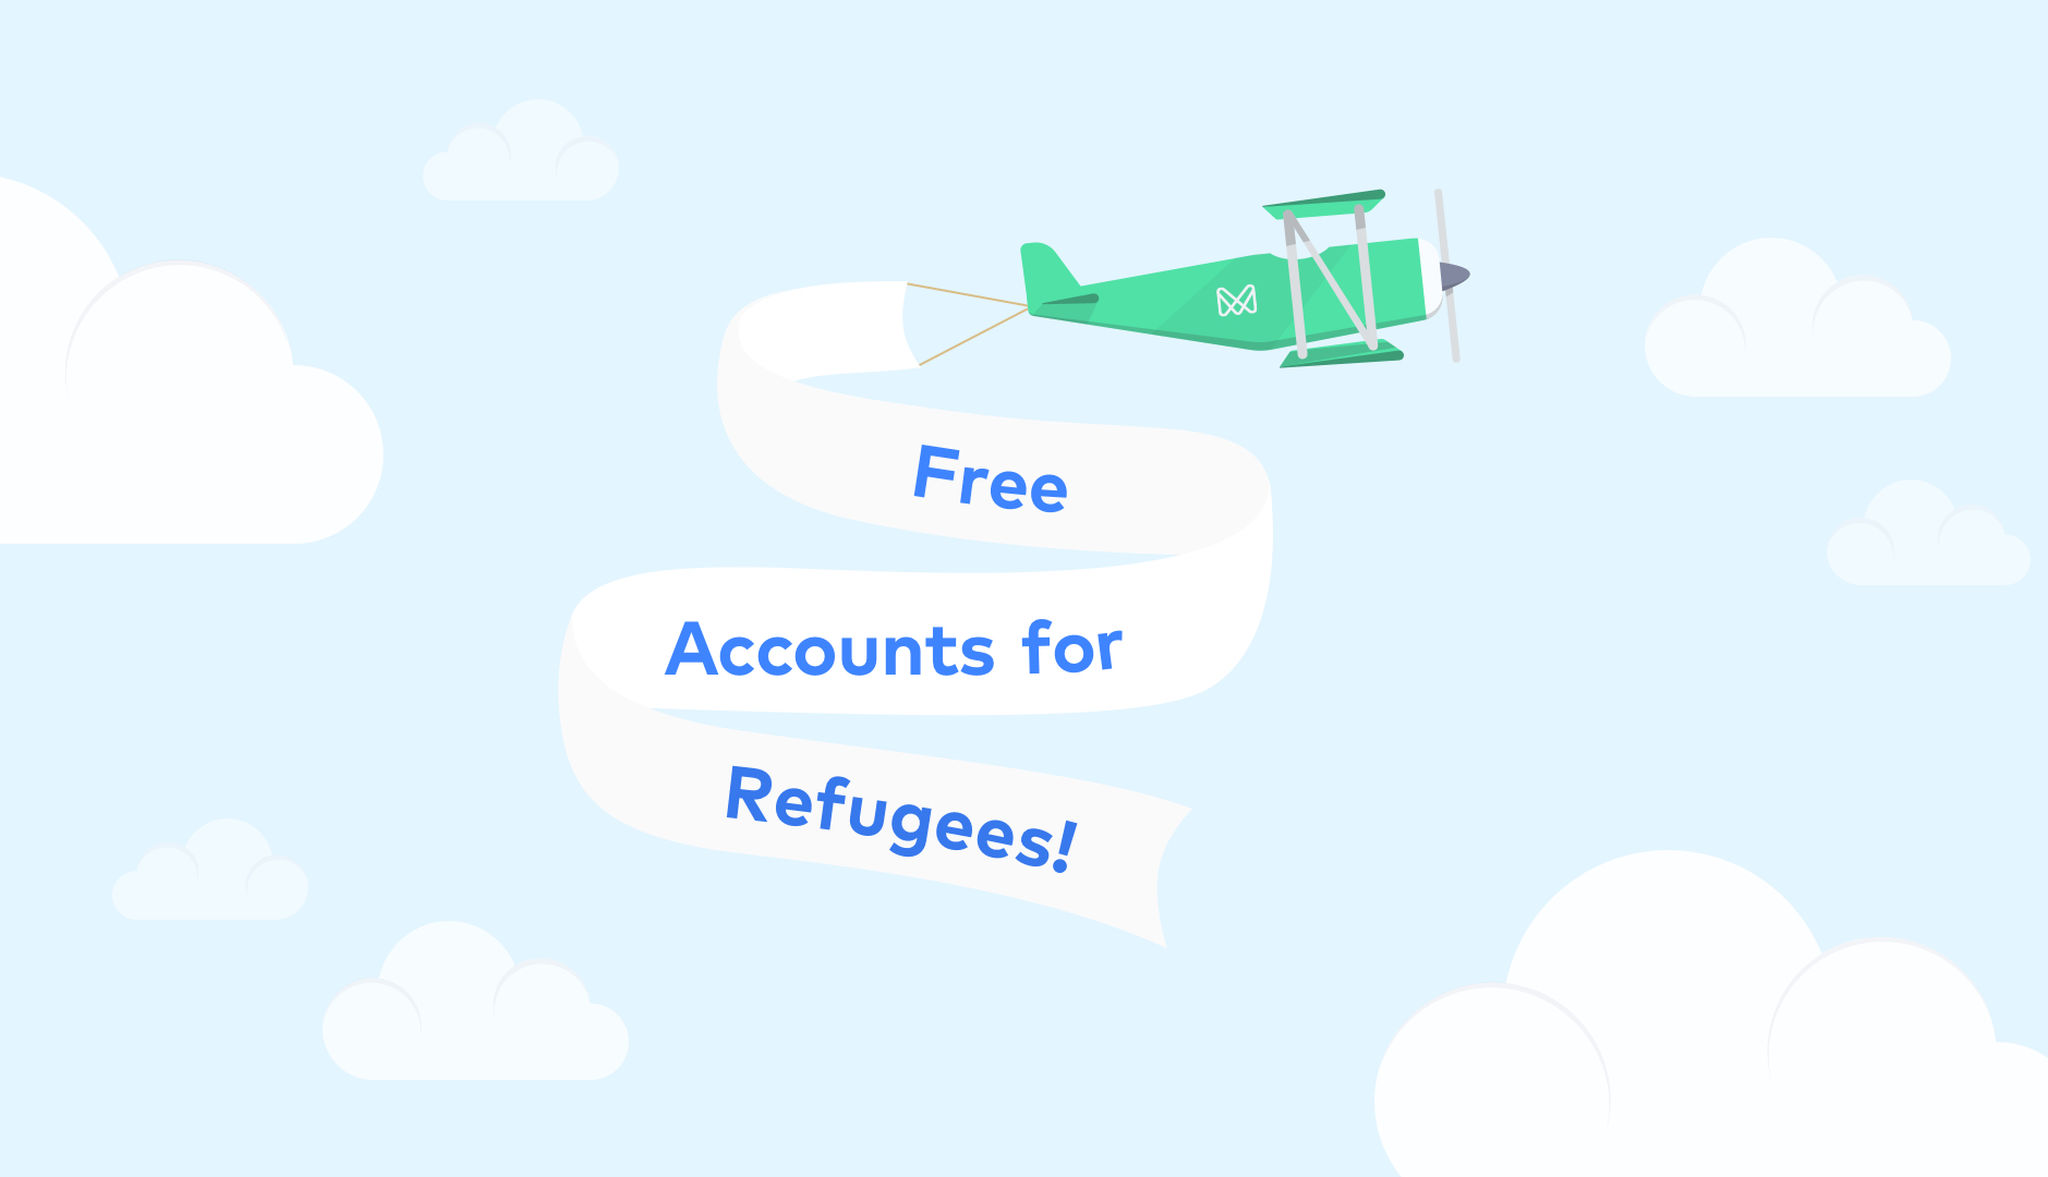 Free Premium accounts for refugees